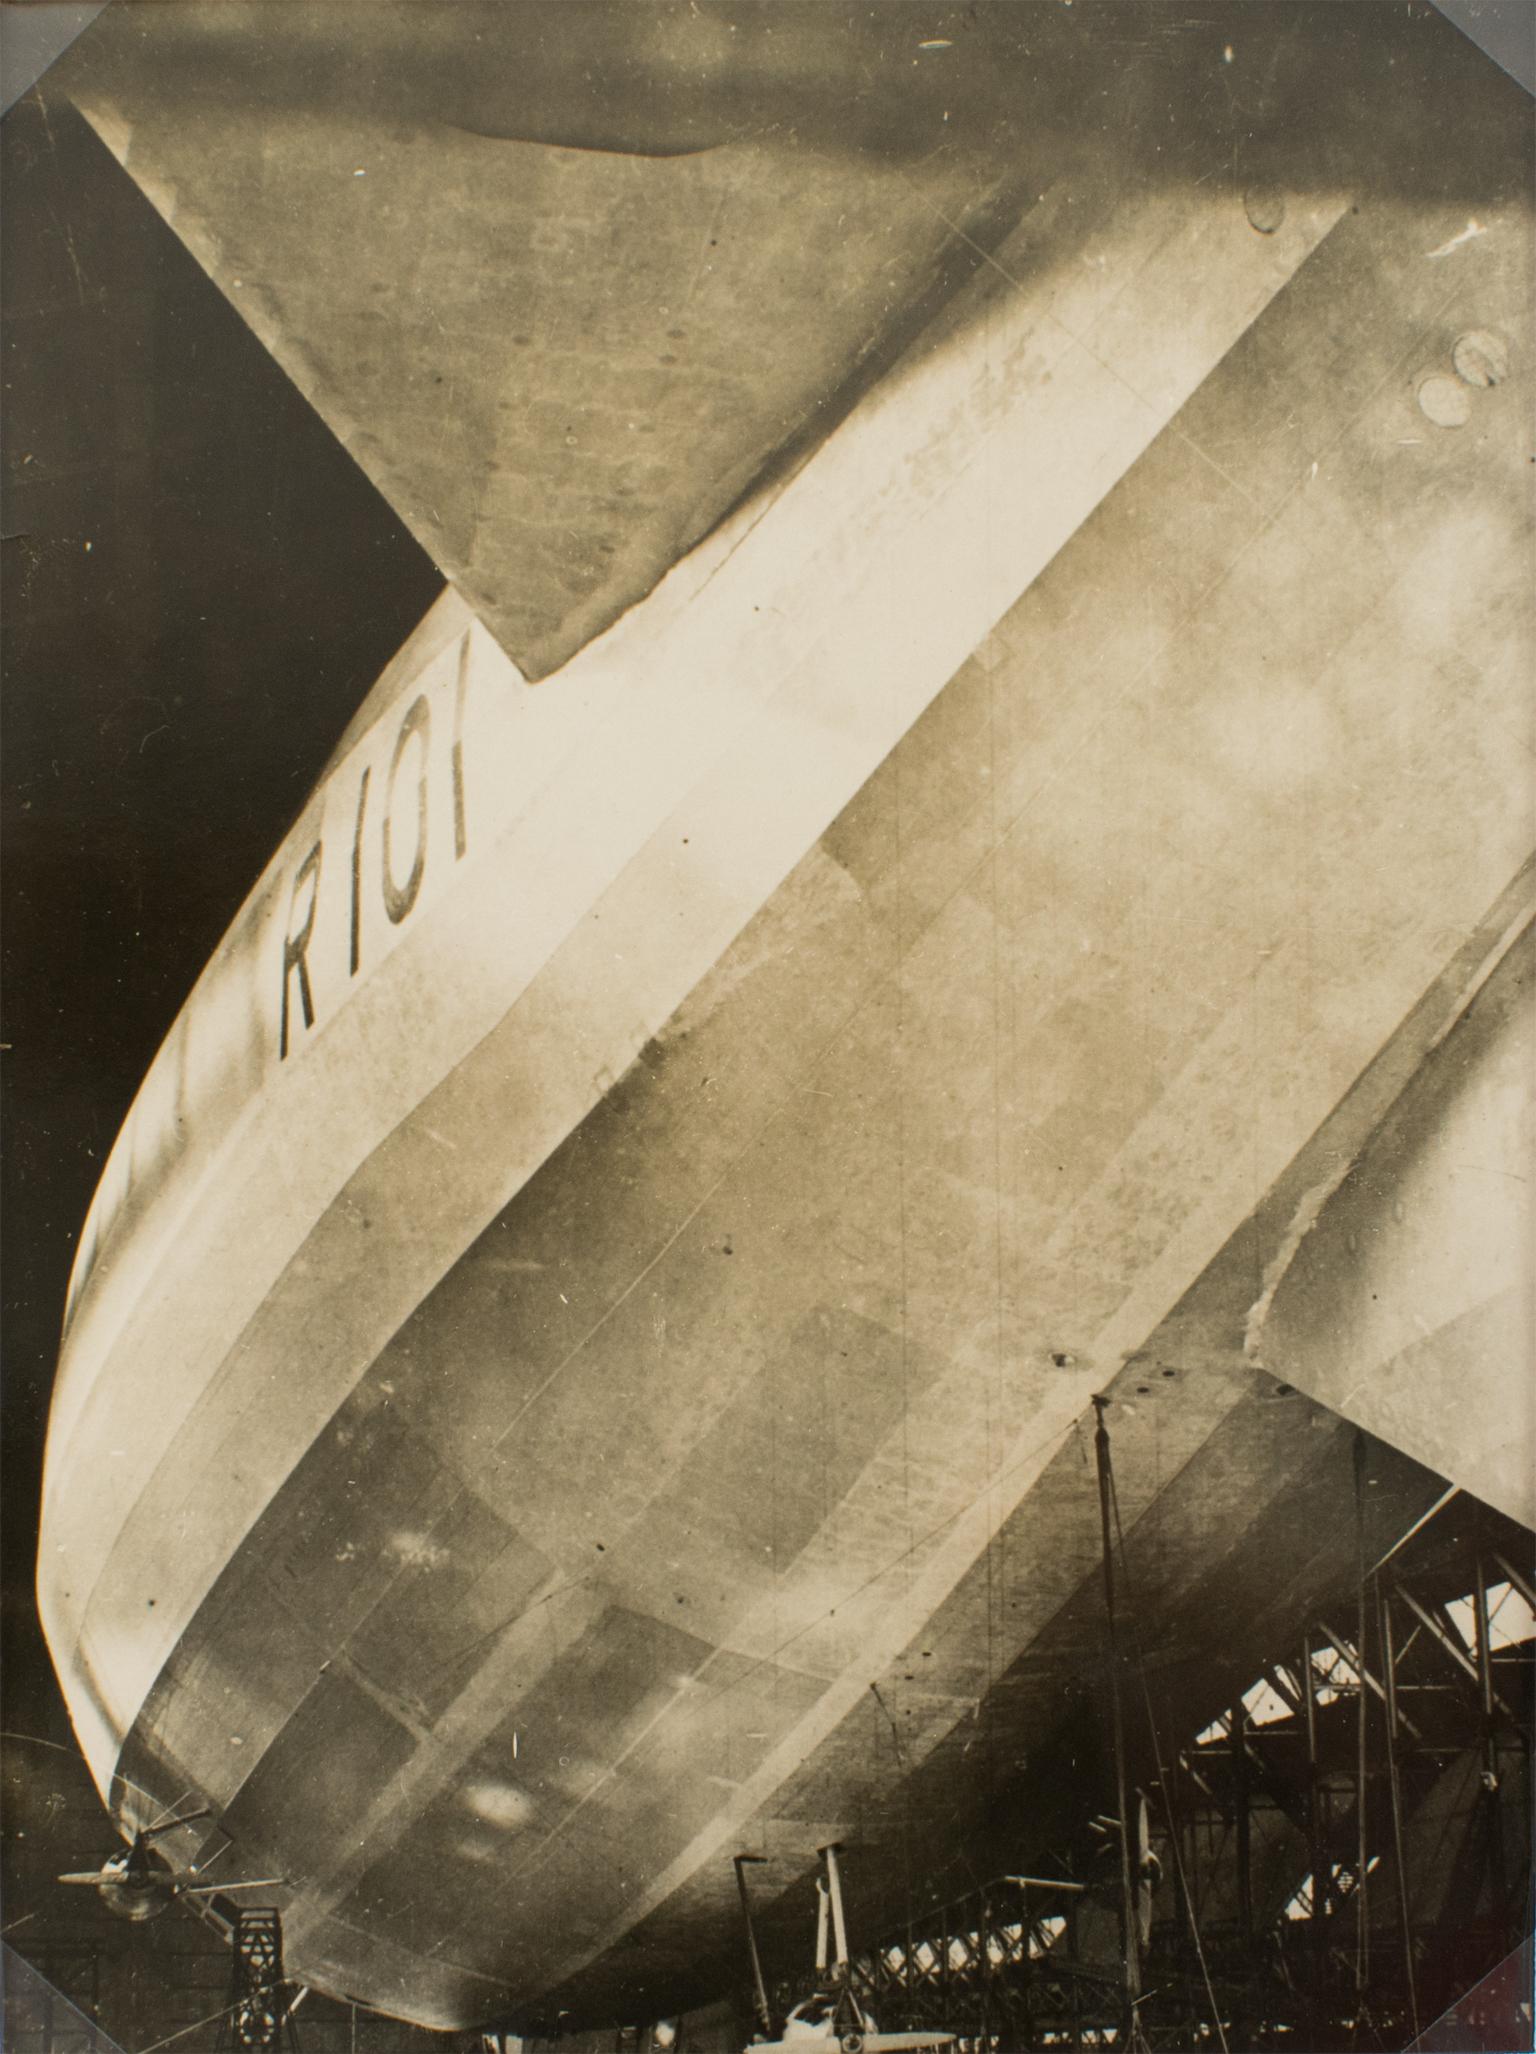 Construction of the Airship R101 Silver Gelatin Black & White Photograph